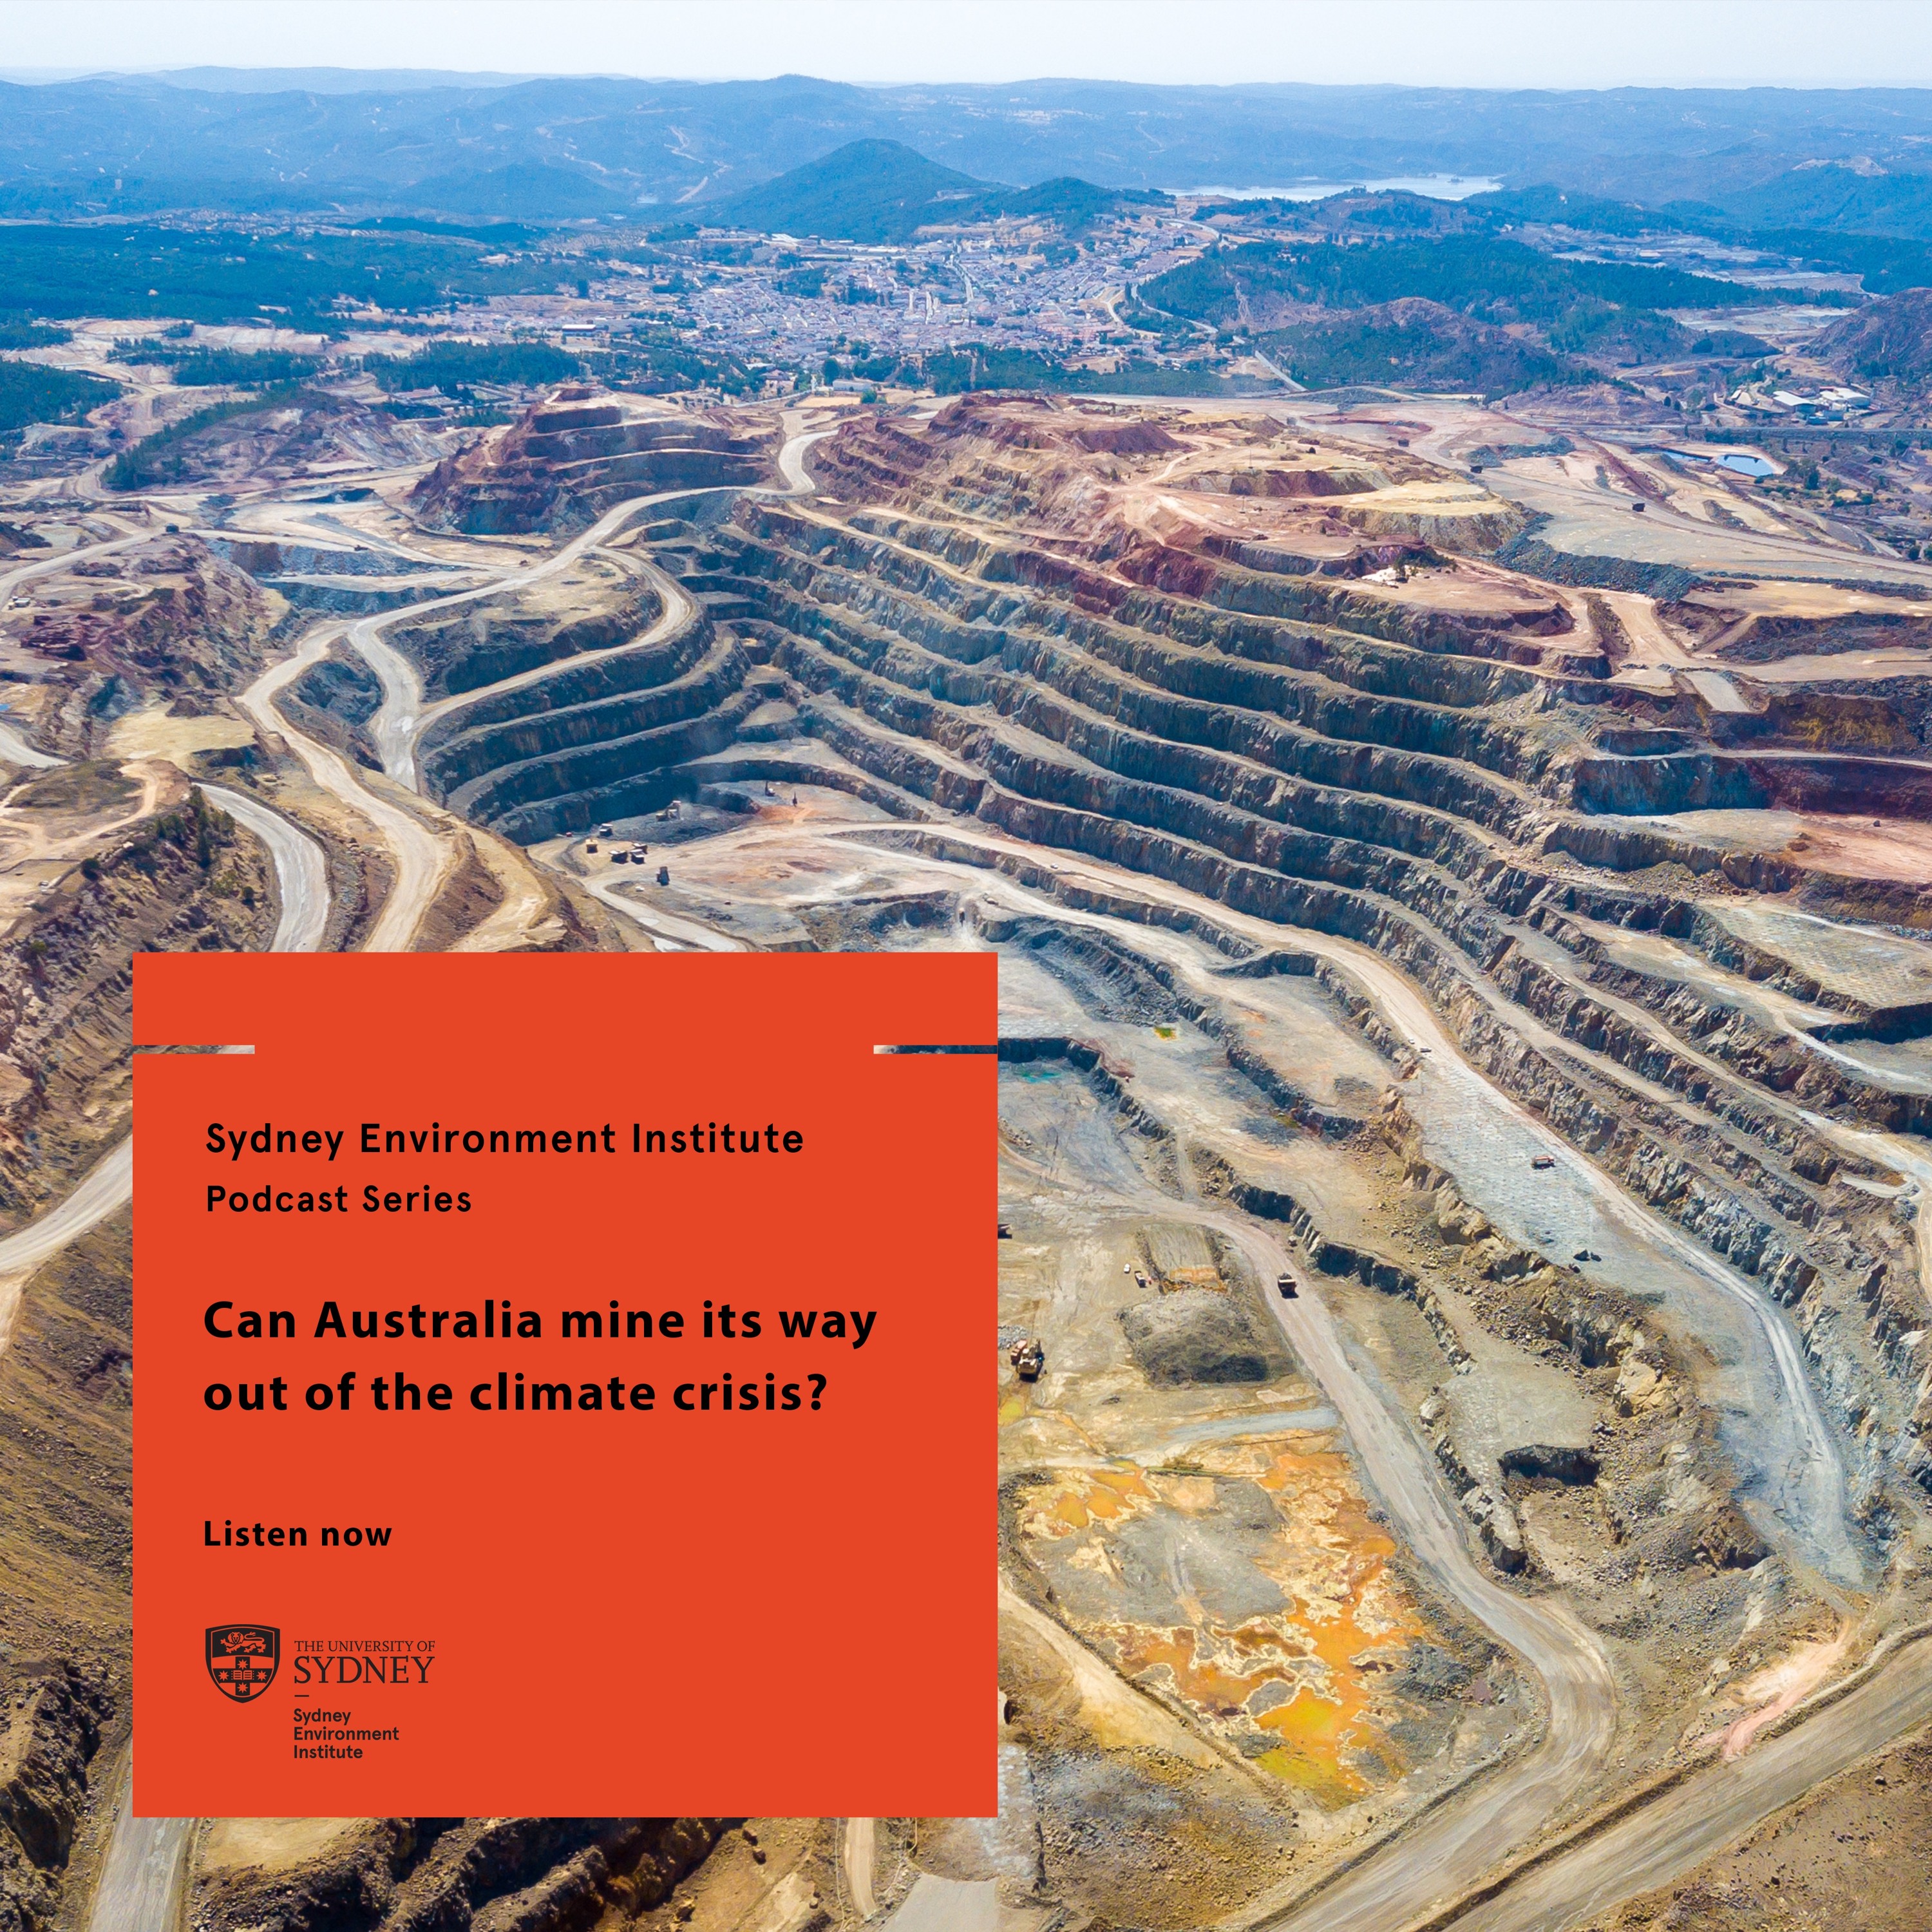 Critical minerals: Can Australia mine its way out of the climate crisis?